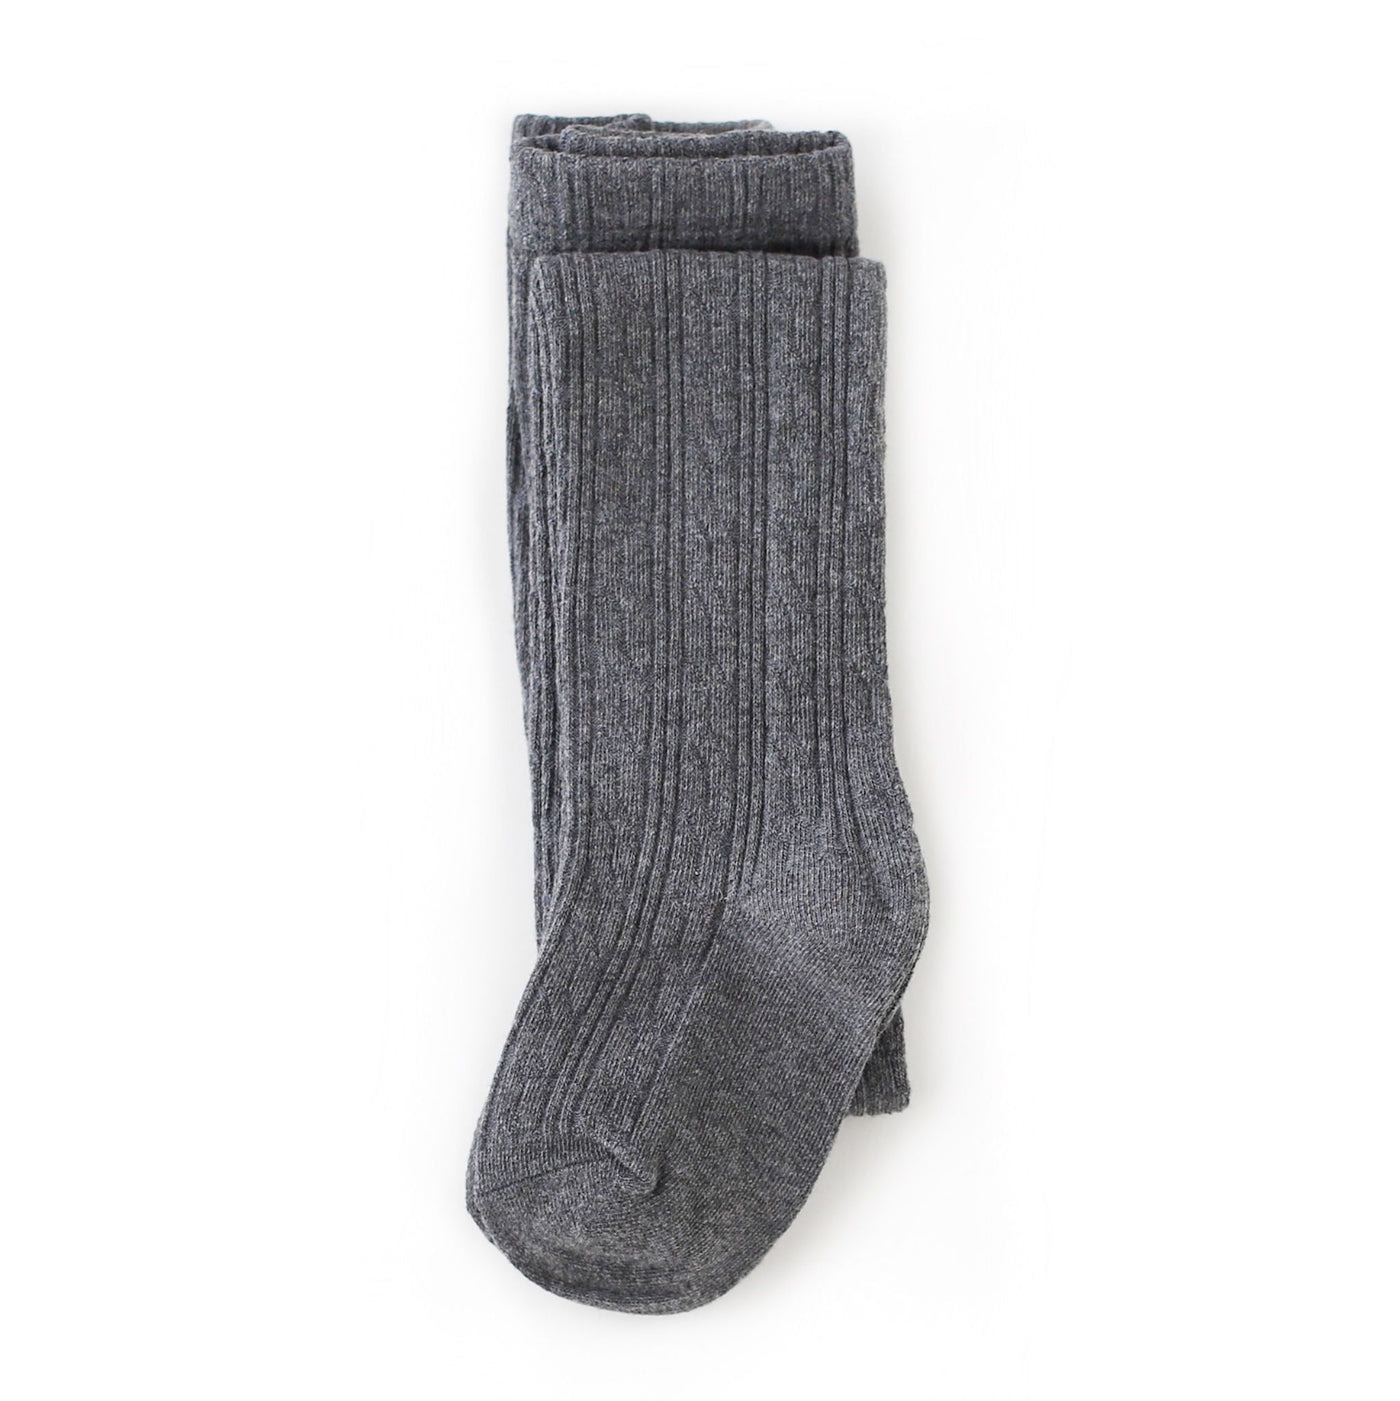 Little Stocking Co. Cable Knit Tights: Charcoal Grey